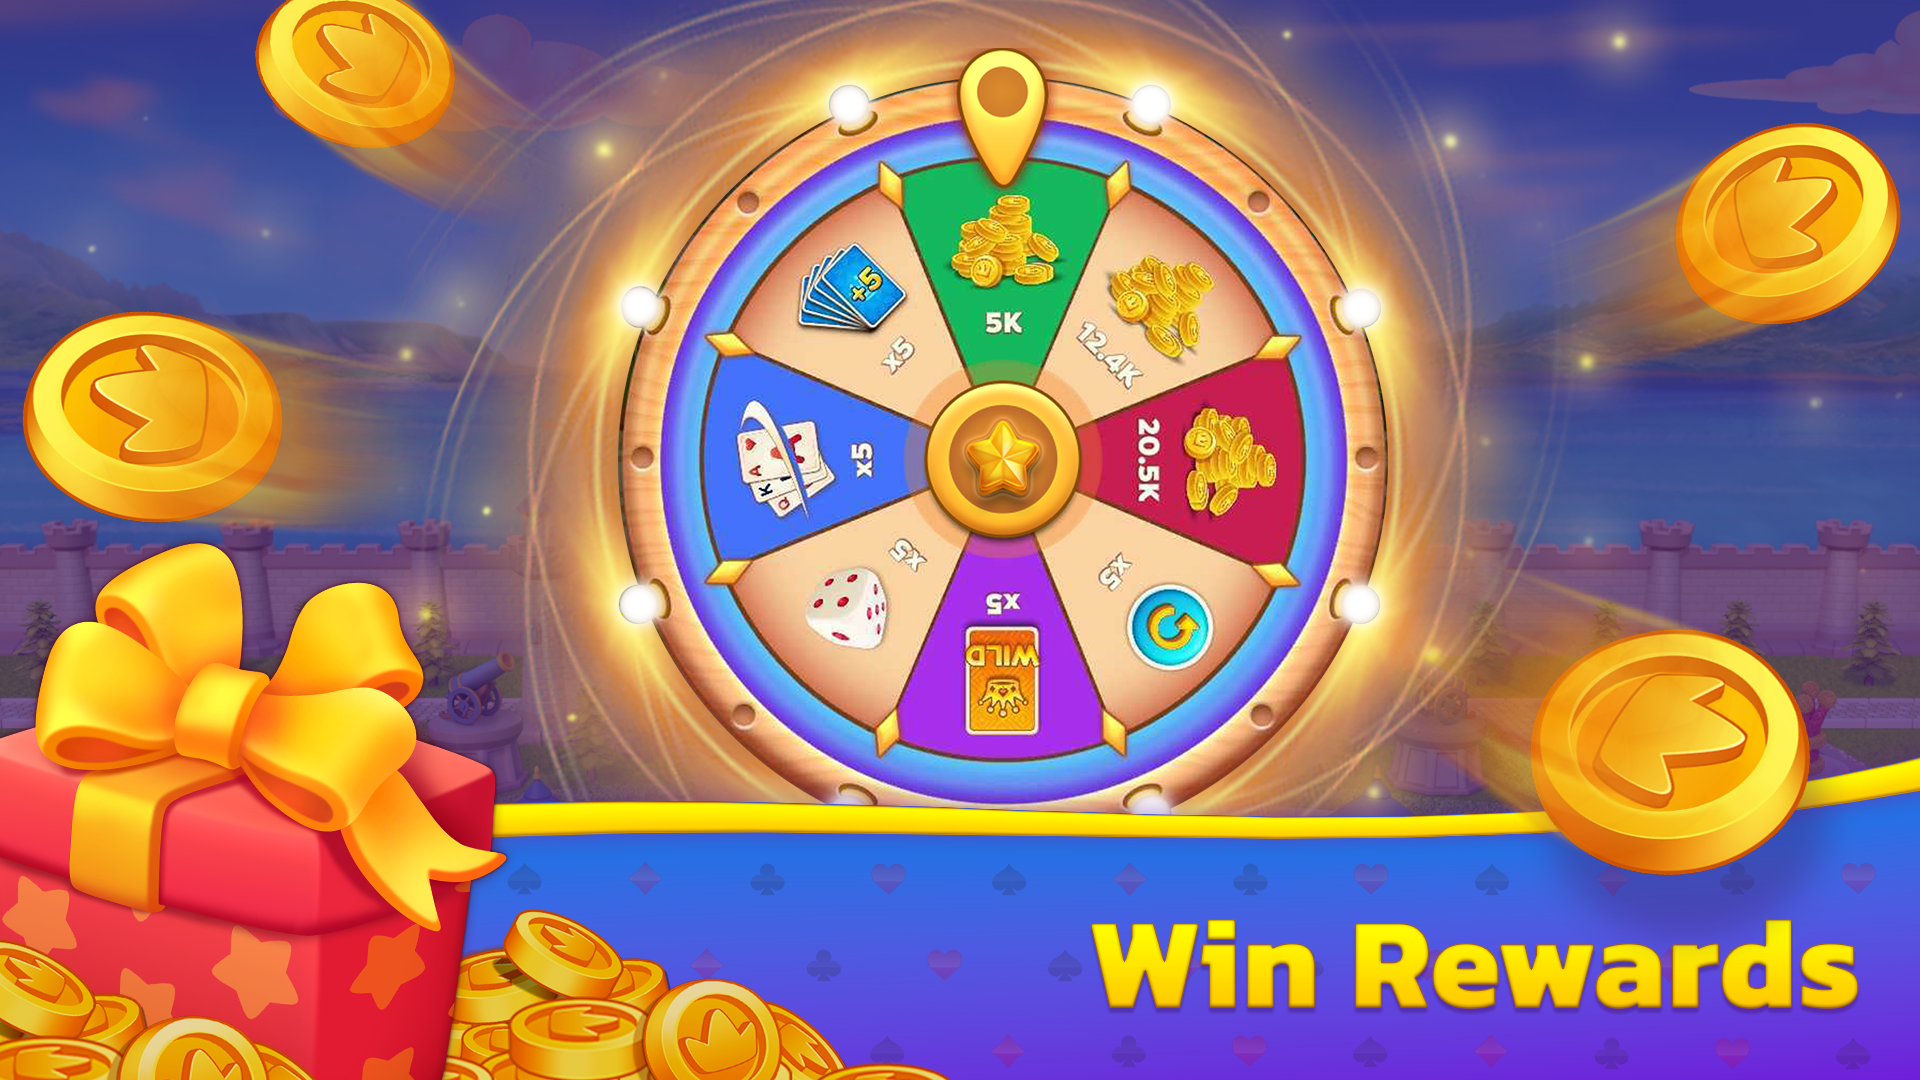 Solitaire Castle Royal screenshot game